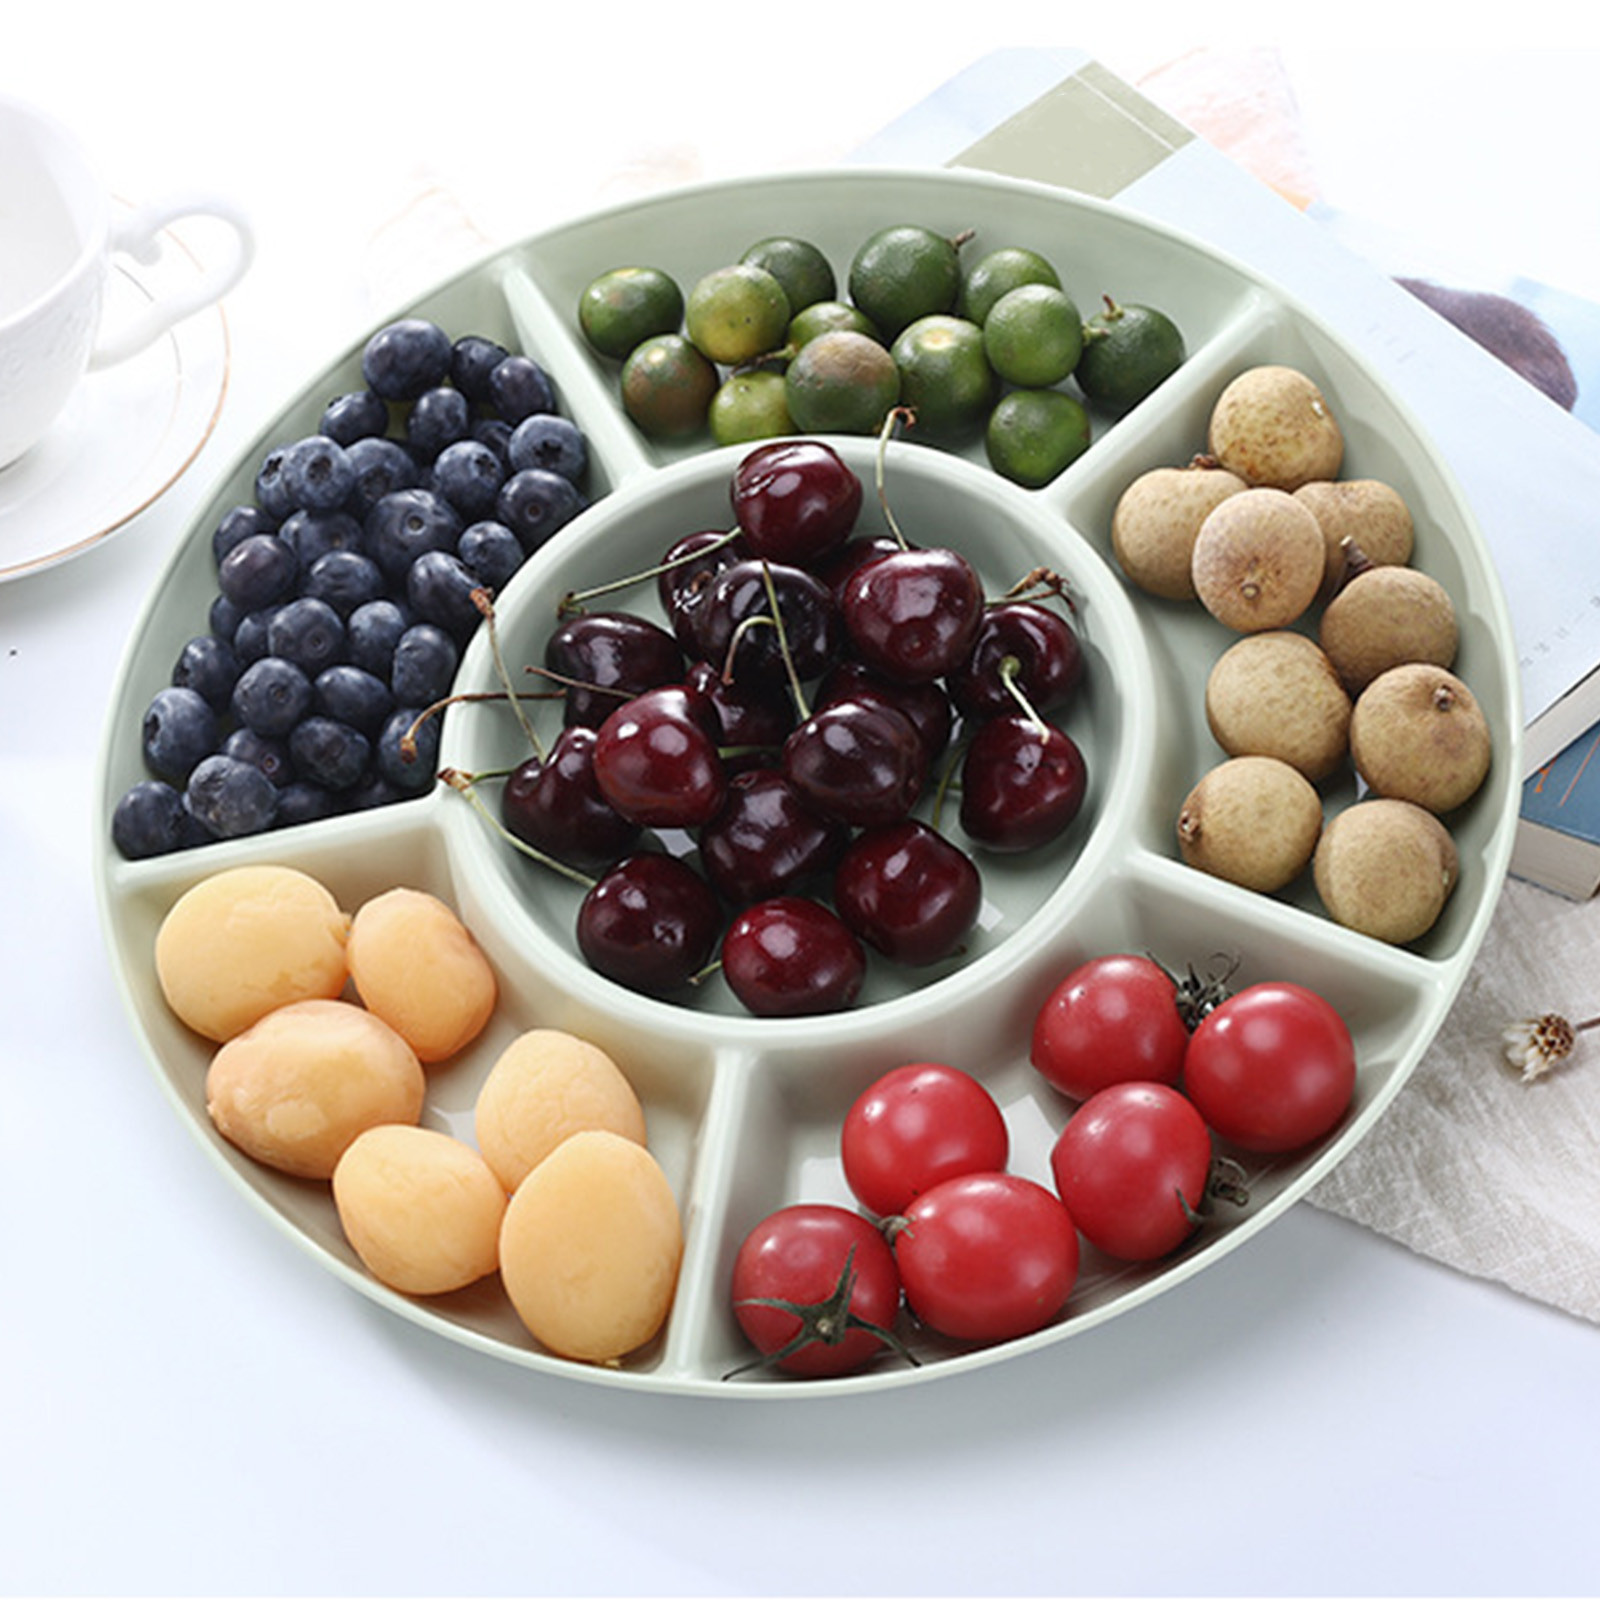 Matoen Divided Serving Dish, Appetizer Snack Tray Platter for Fruit, Veggies, Candy, Chip and Dip, Relish Tray for Christmas Thanksgiving Party, 5 Compartment, Green - image 1 of 6